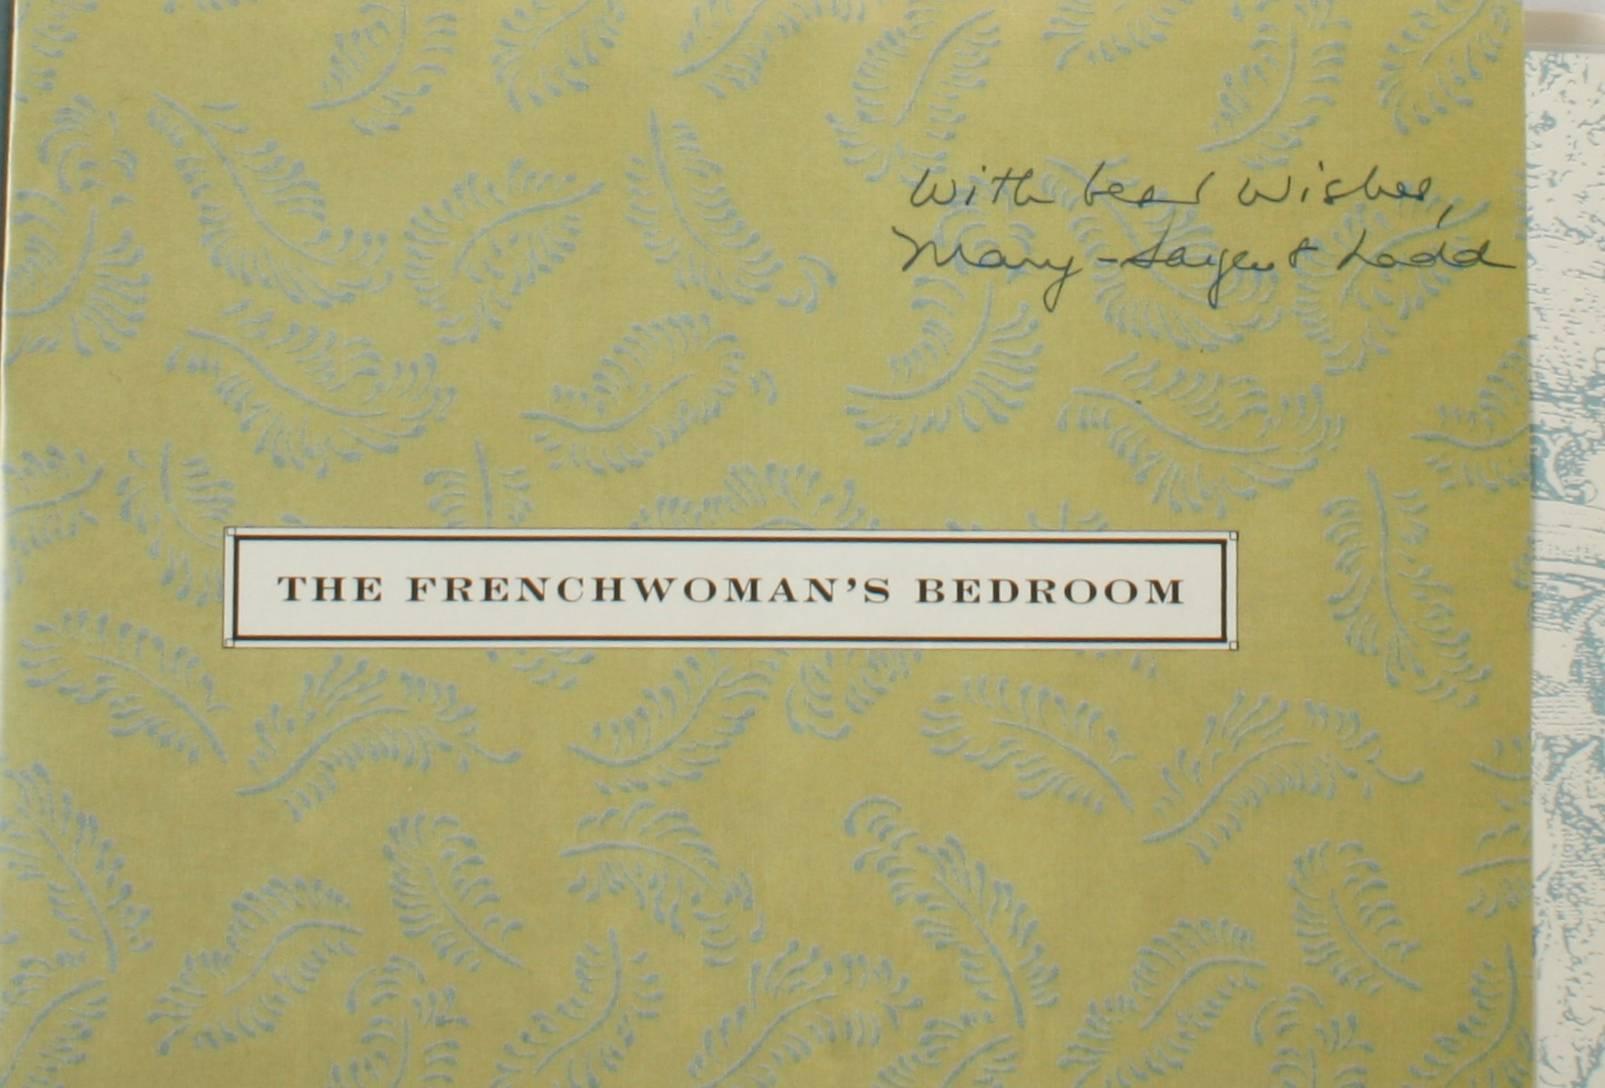 The French woman's bedroom by Mary Sargent Ladd. NY: Doubleday, 1991. Signed first edition hardcover with dust jacket. 205 pp. A pretty coffee table book with an insider's view of the bedrooms of 31 notable French women. The book tells that a